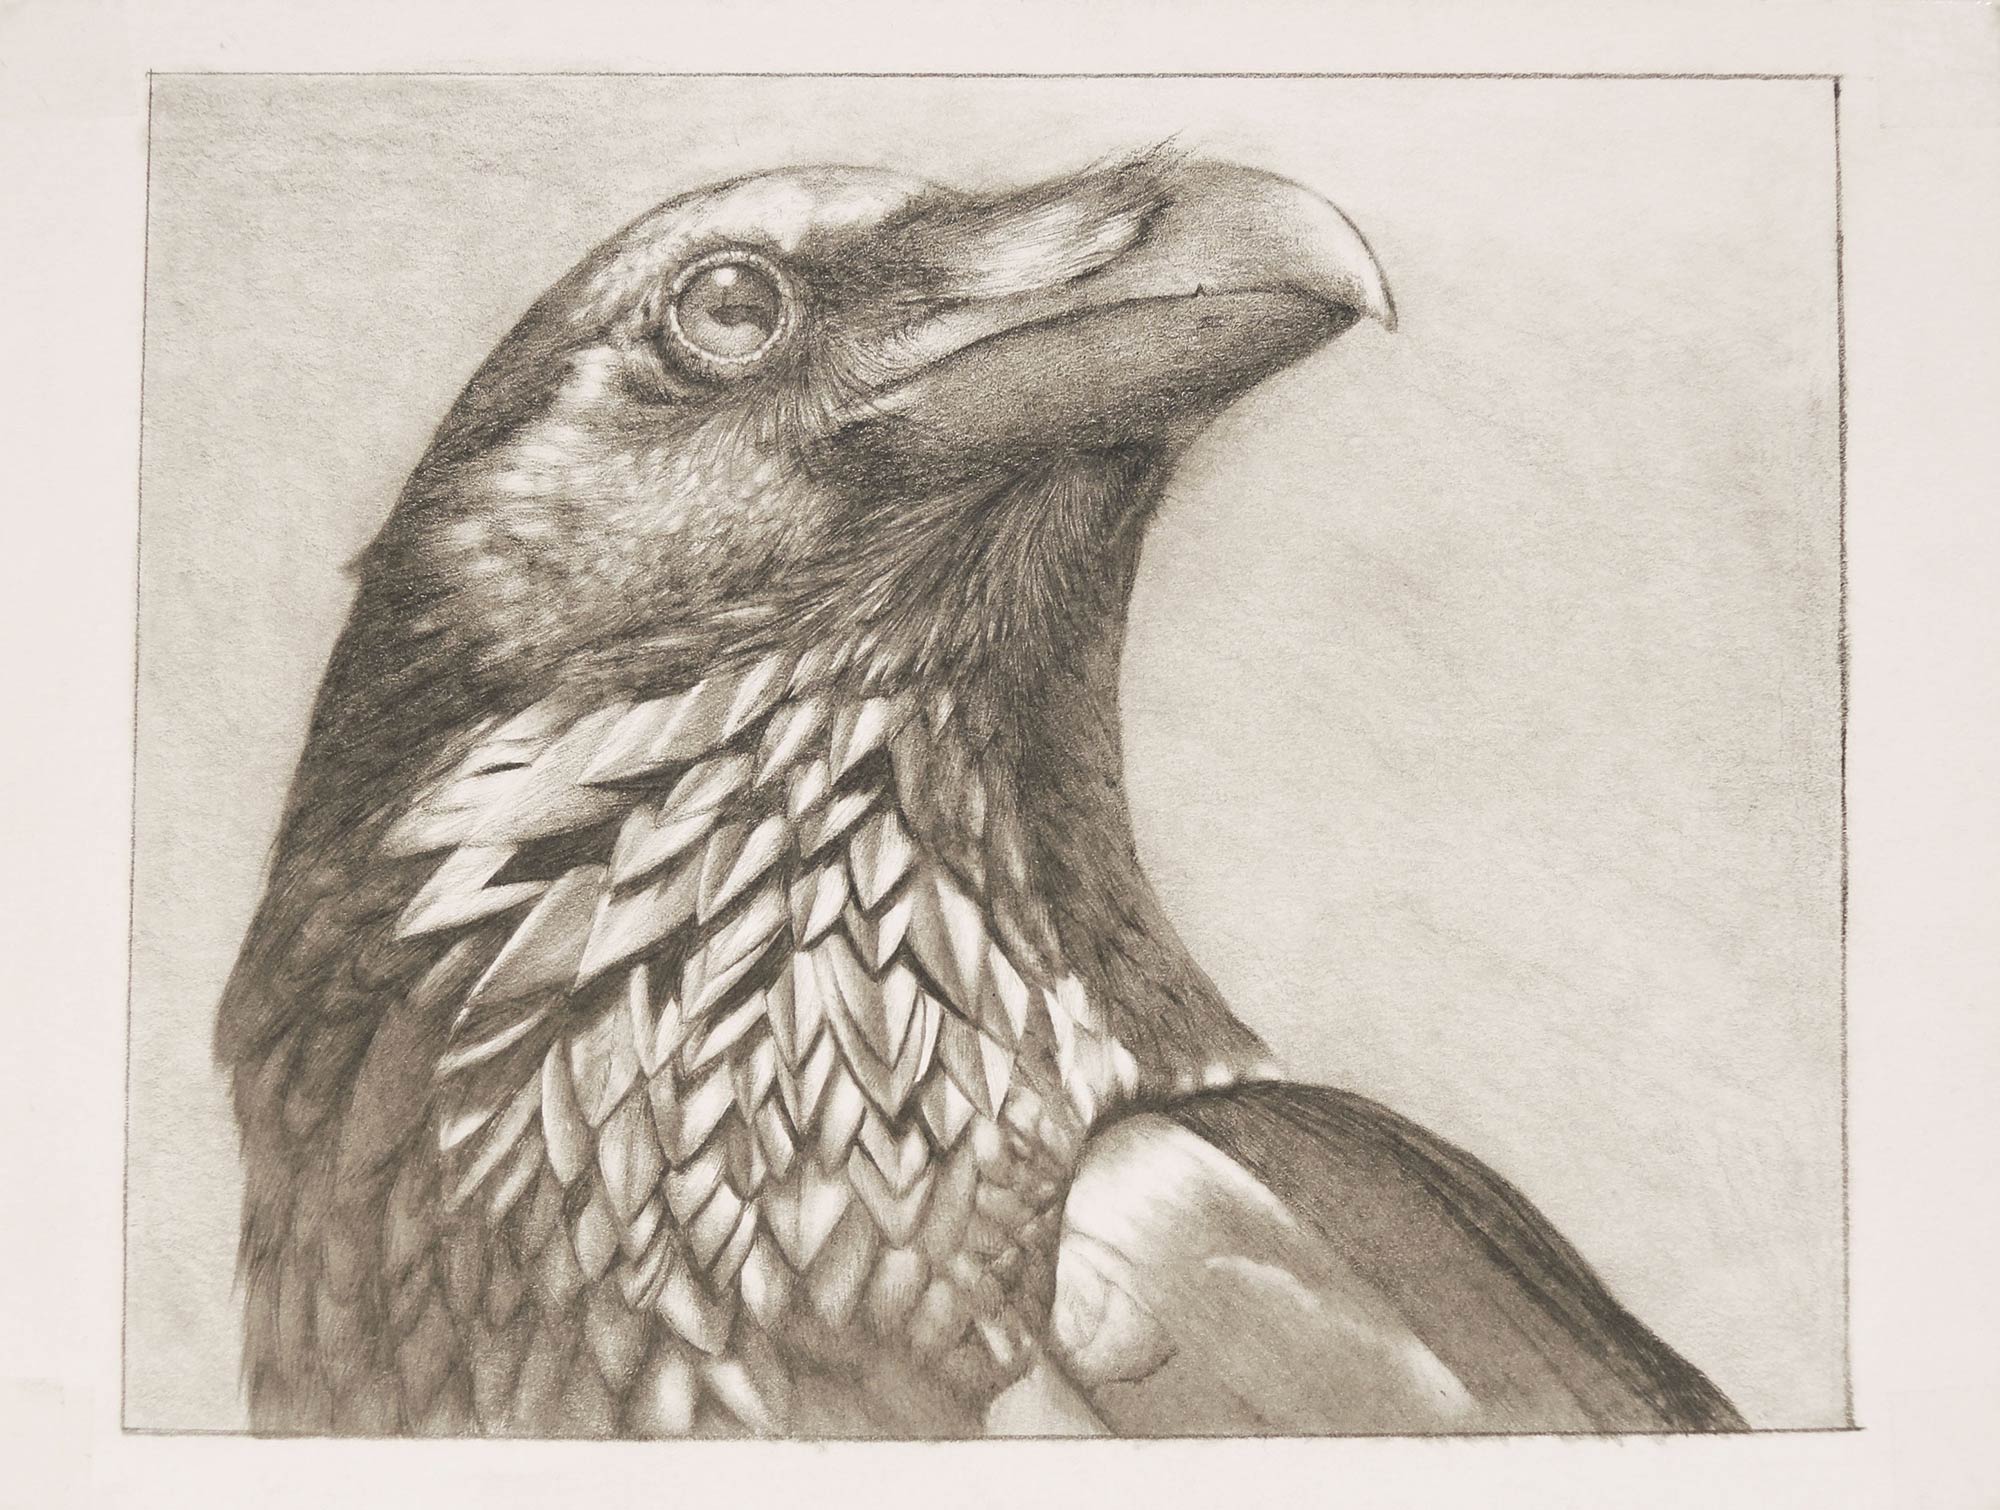 A drawing by Perdong Lin of a bird's head